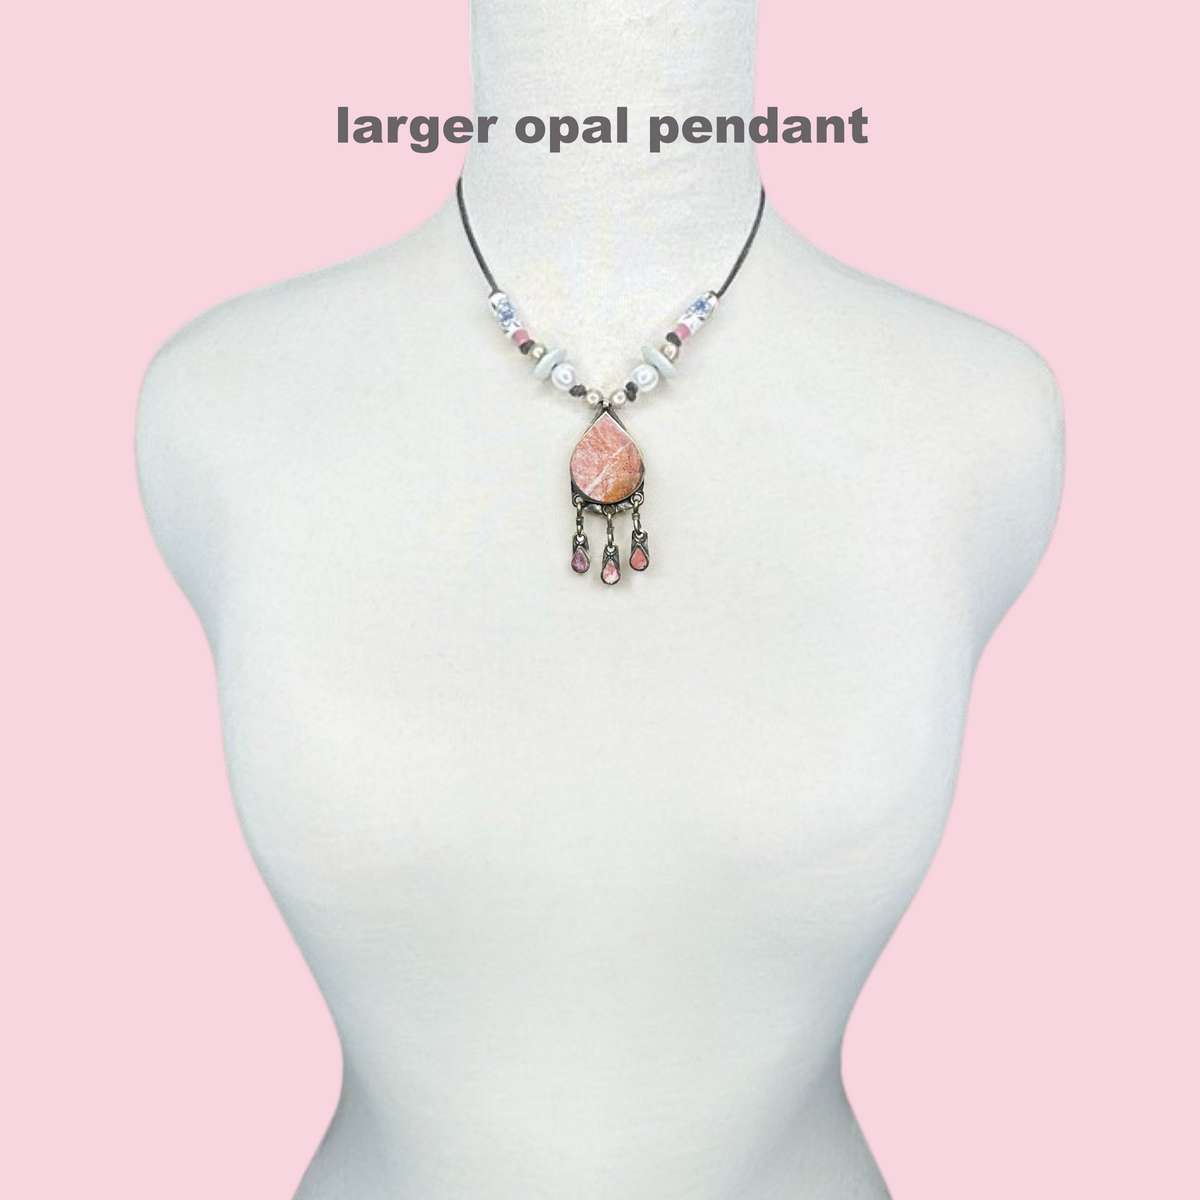 TICKETS: Artist Talk/create jewels together pink opal, pearl, and African silver necklace/bracelet